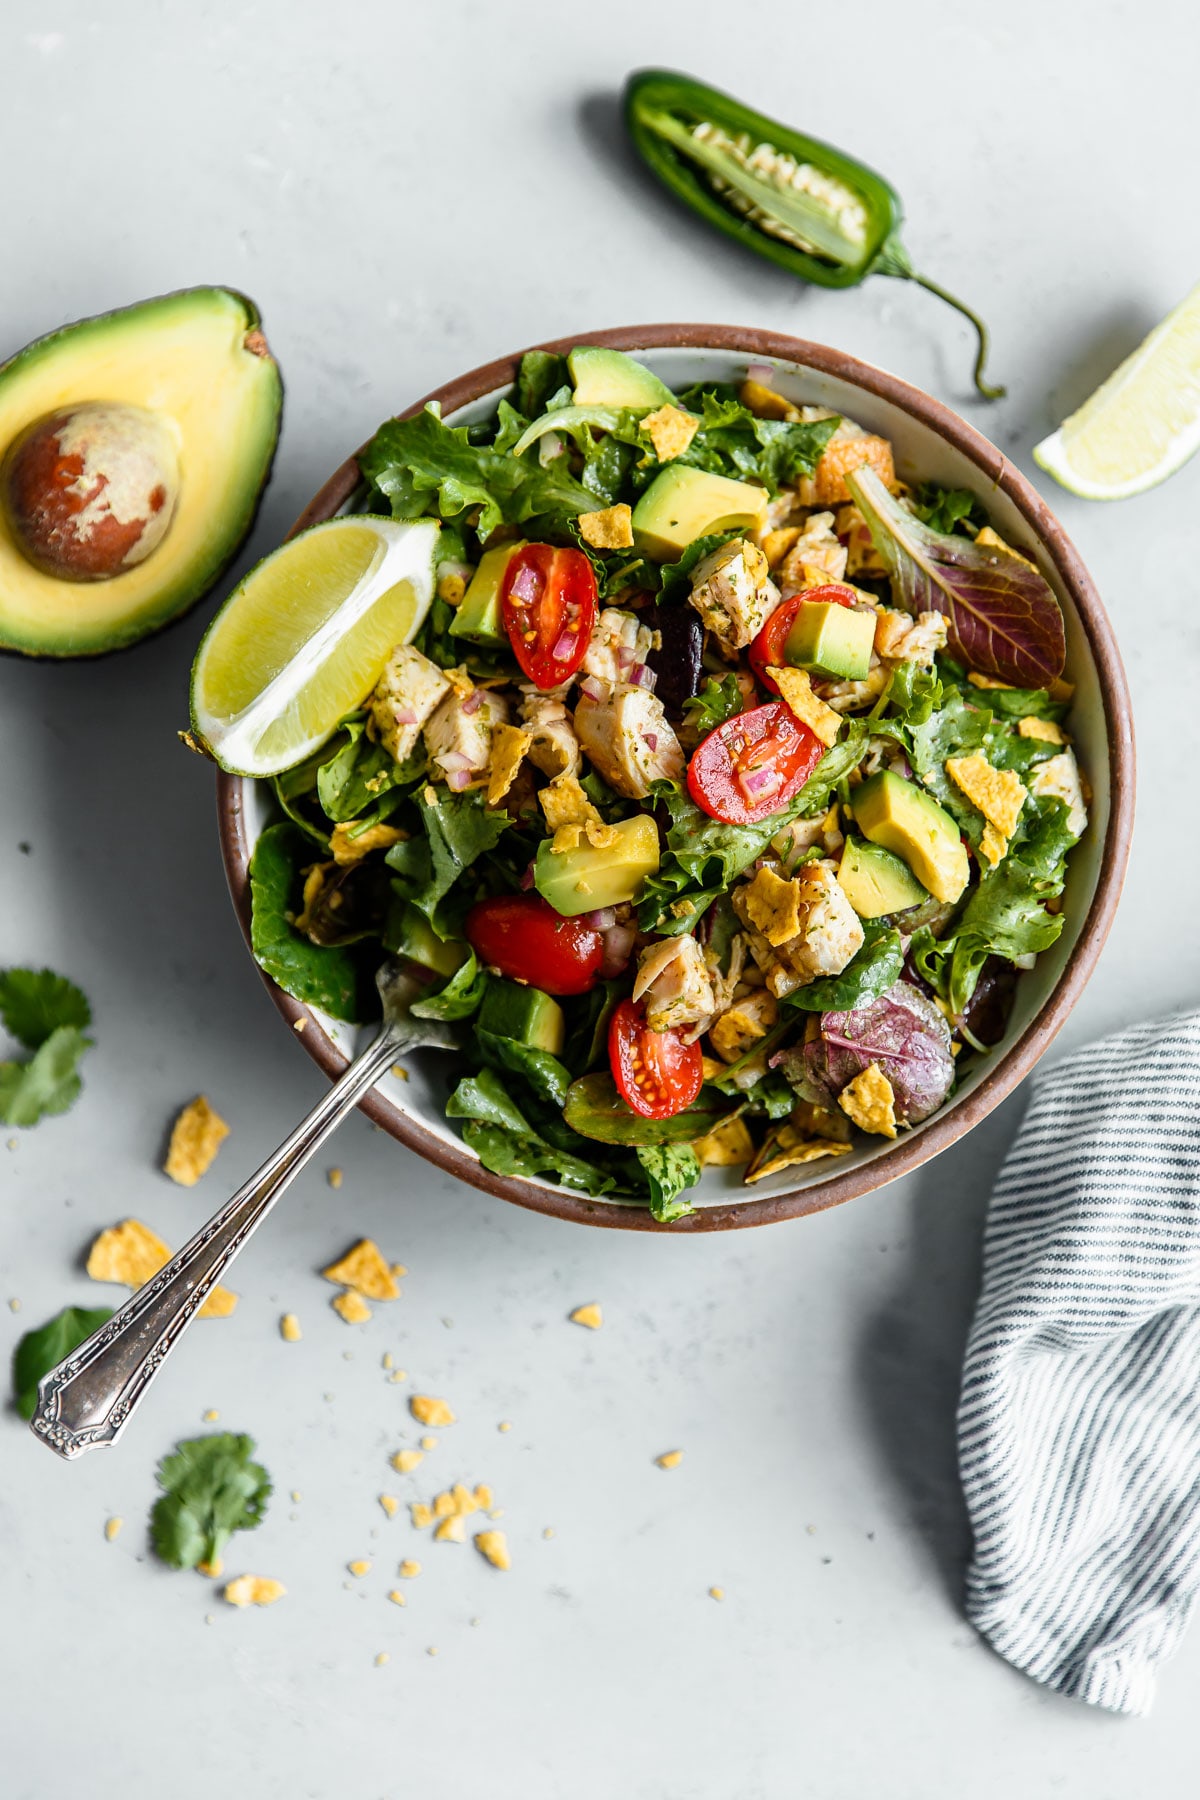 Meal Prep Grilled Lime Chicken and Avocado Salad - Pretty